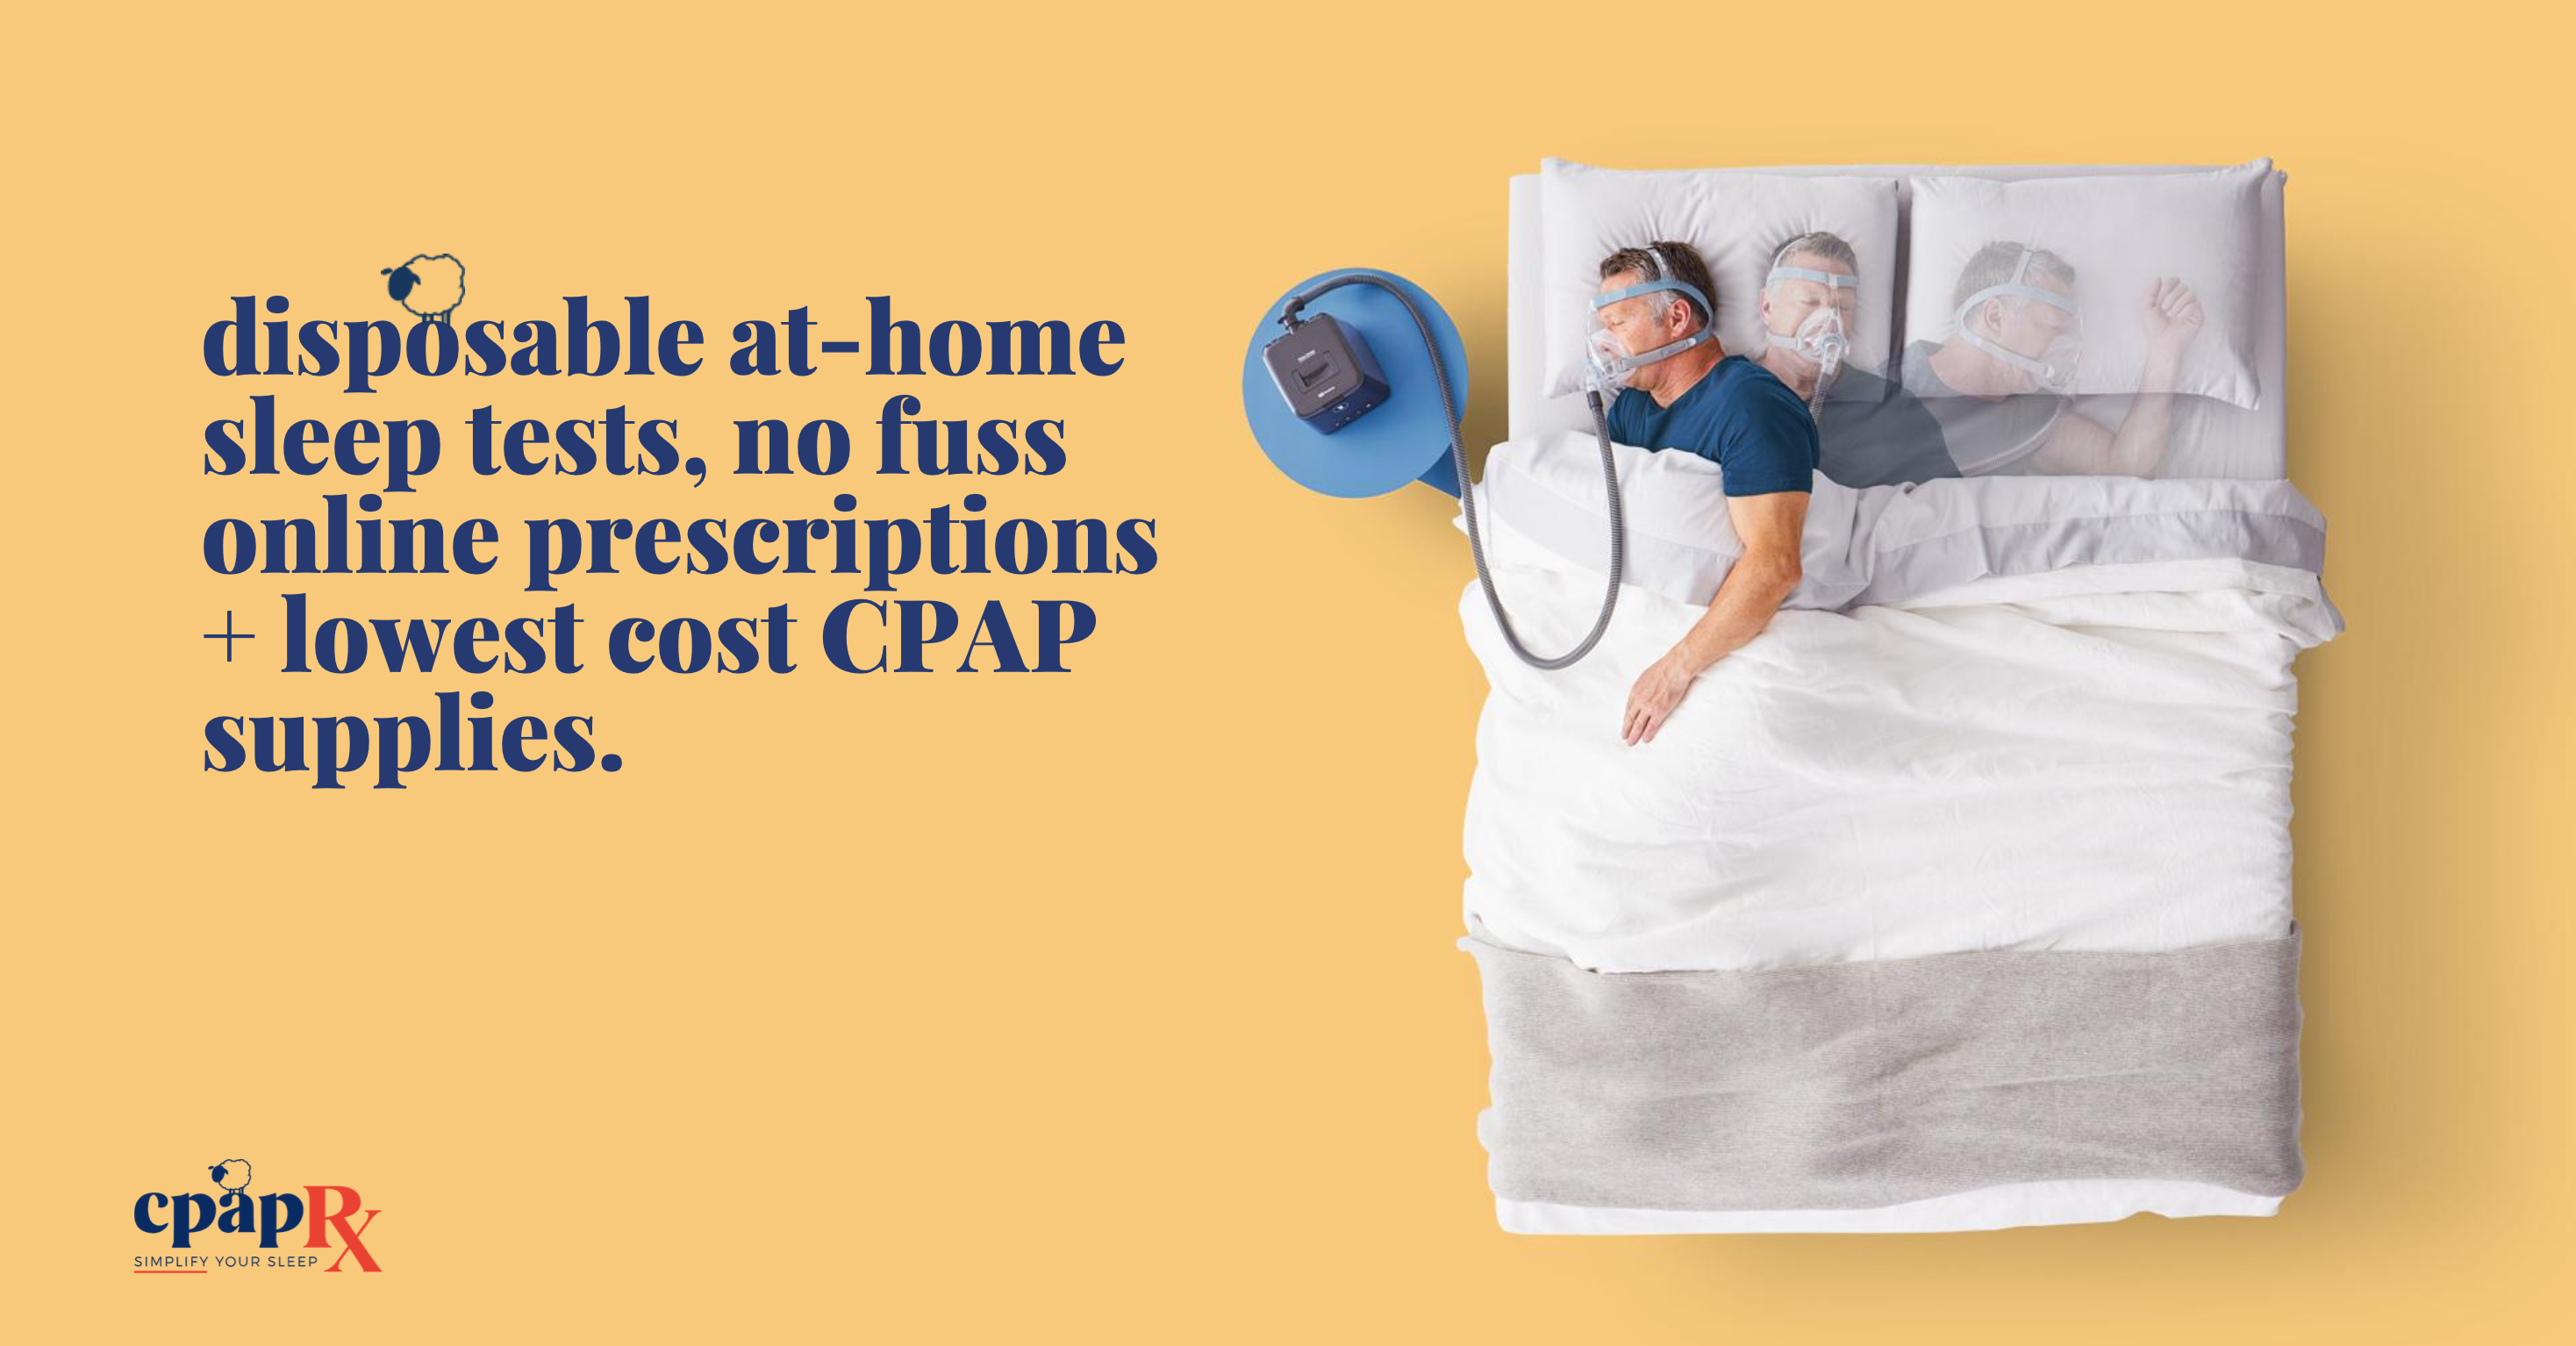 cpapRX offers disposable at-home sleep studies, online CPAP prescription services, and low-cost CPAP supplies